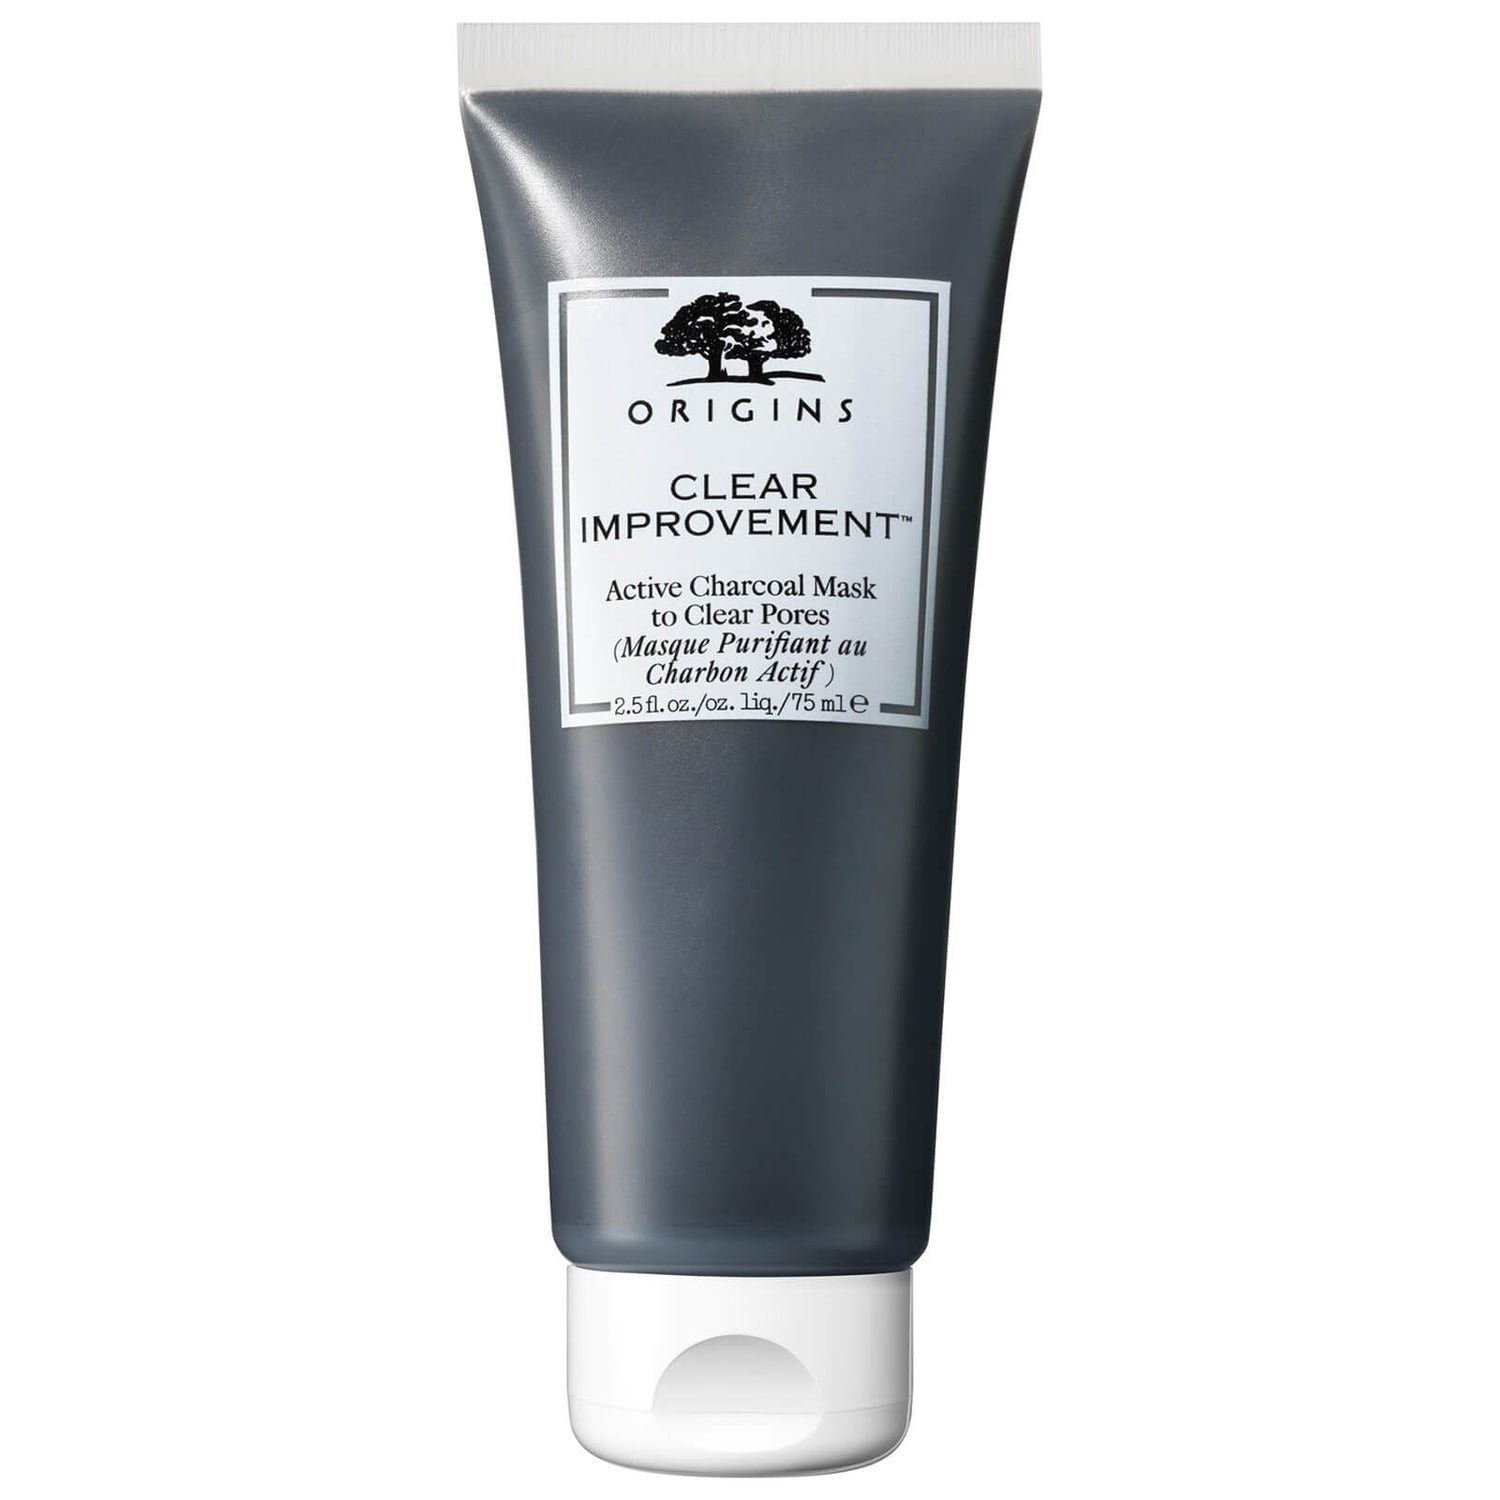 Origins Clear Improvement Active Charcoal Mask to Clear Pores 100ml